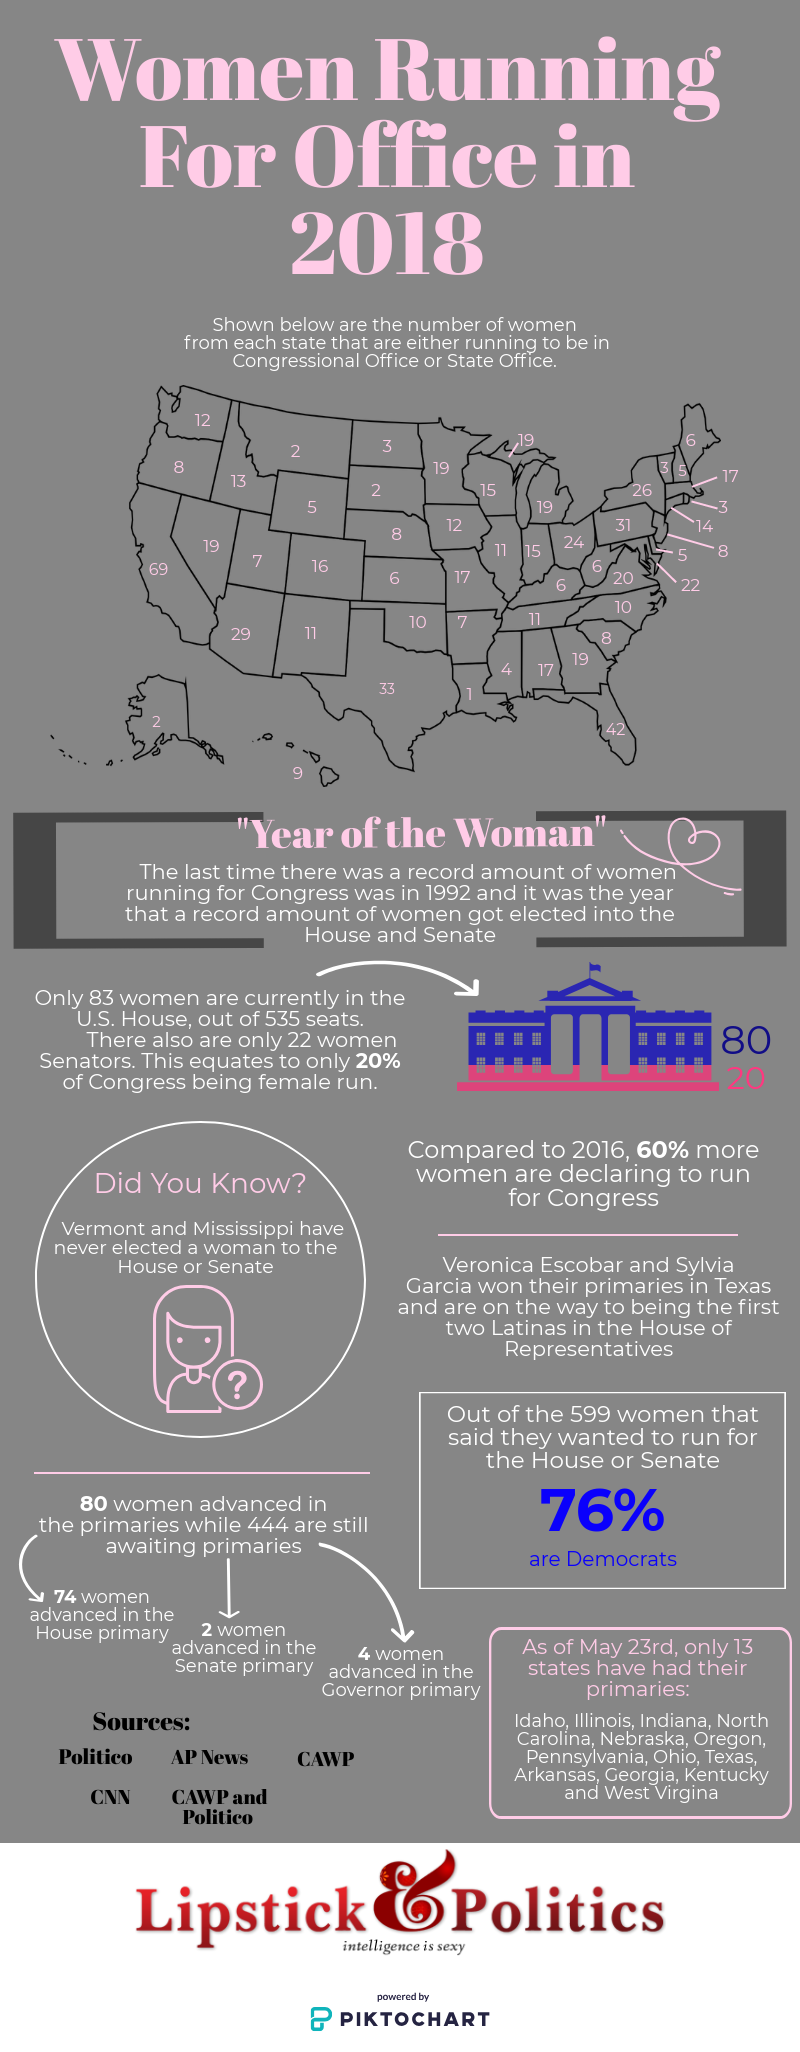 This infographic details how many women are running for office across the nation and visually shows how 2018 is the modern "Year of the Women."